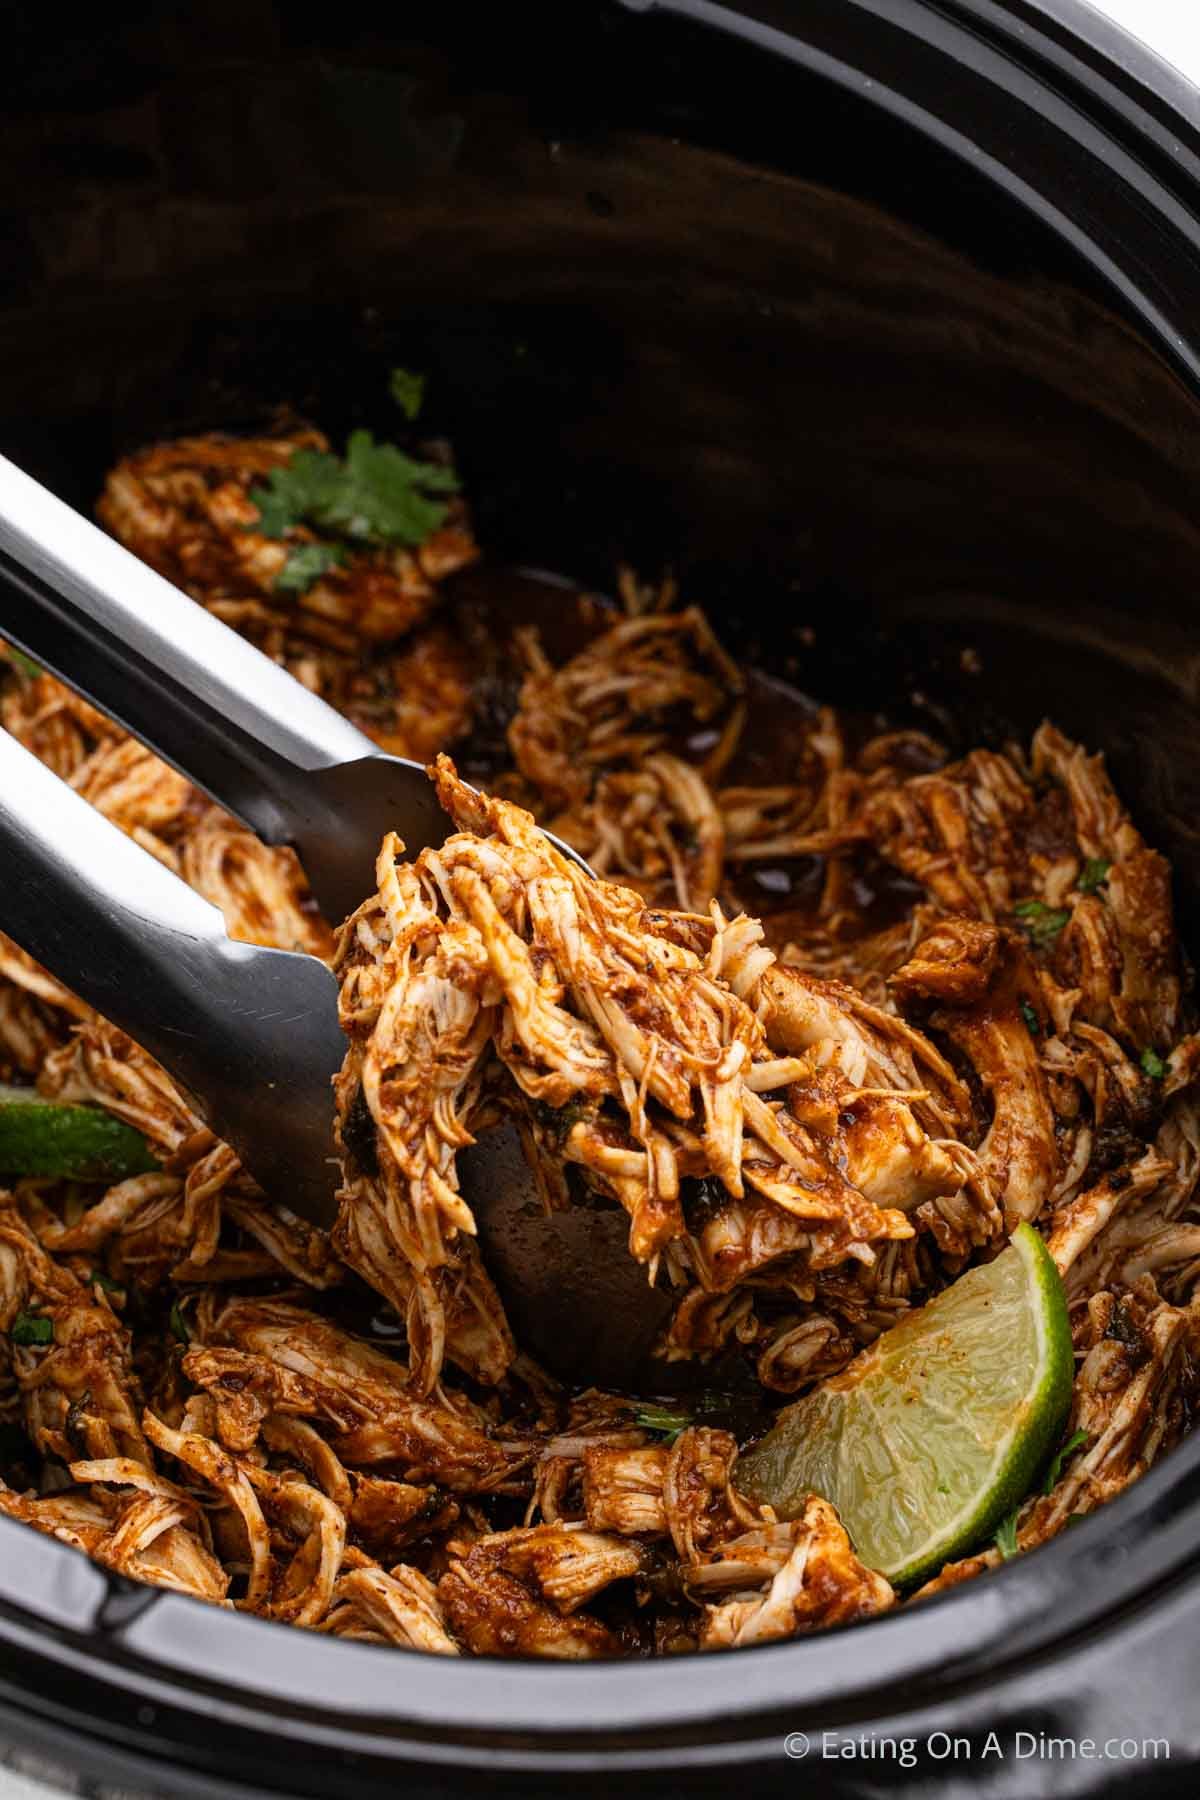 Cilantro Lime Shredded Chicken in the slow cooker